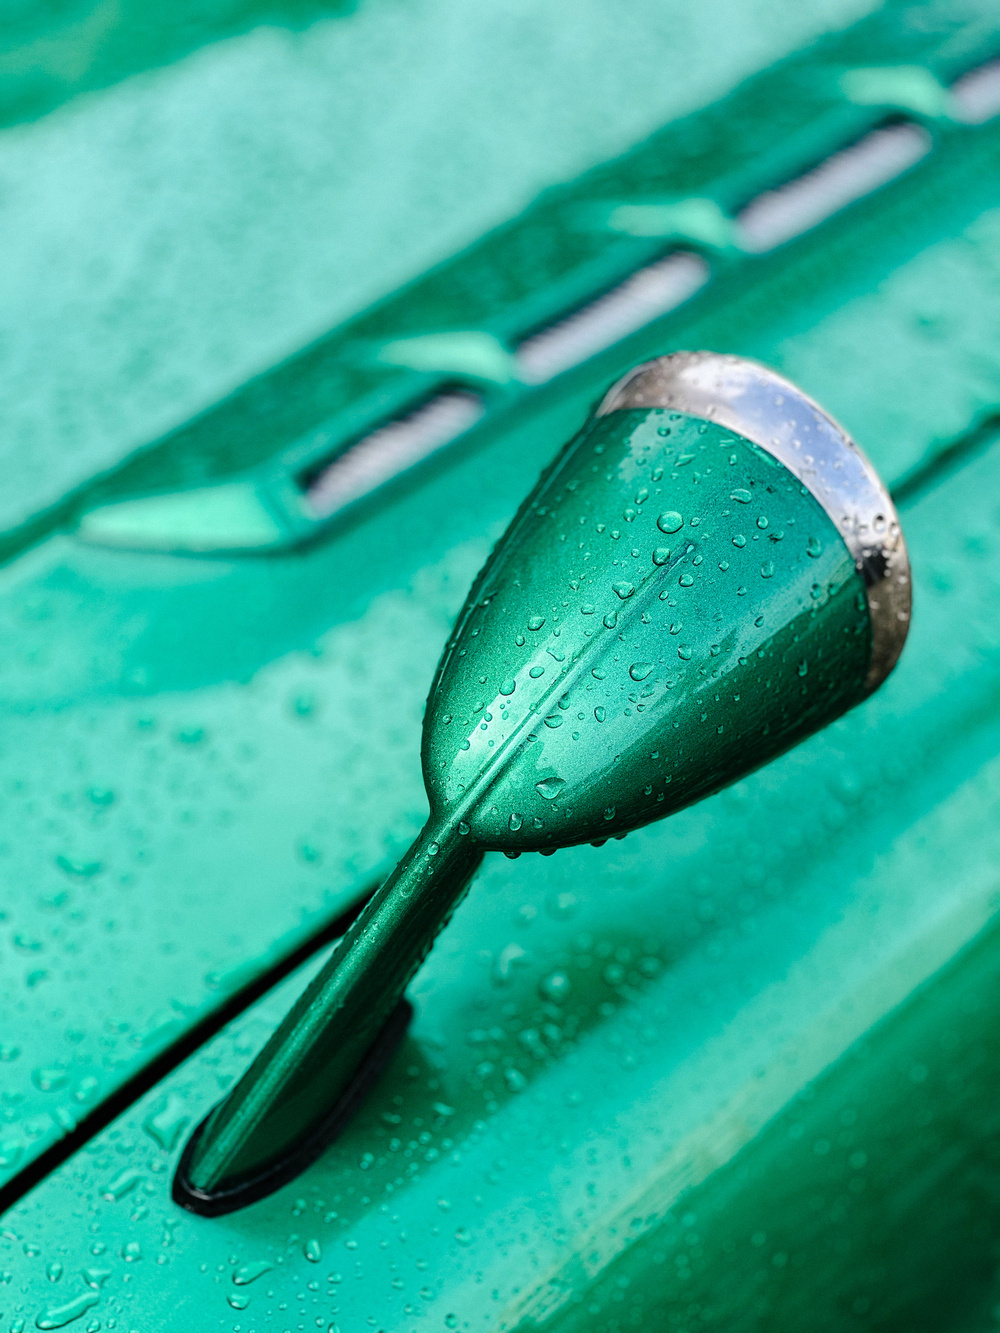 A close-up of a green car&rsquo;s side-view mirror with water droplets on it.